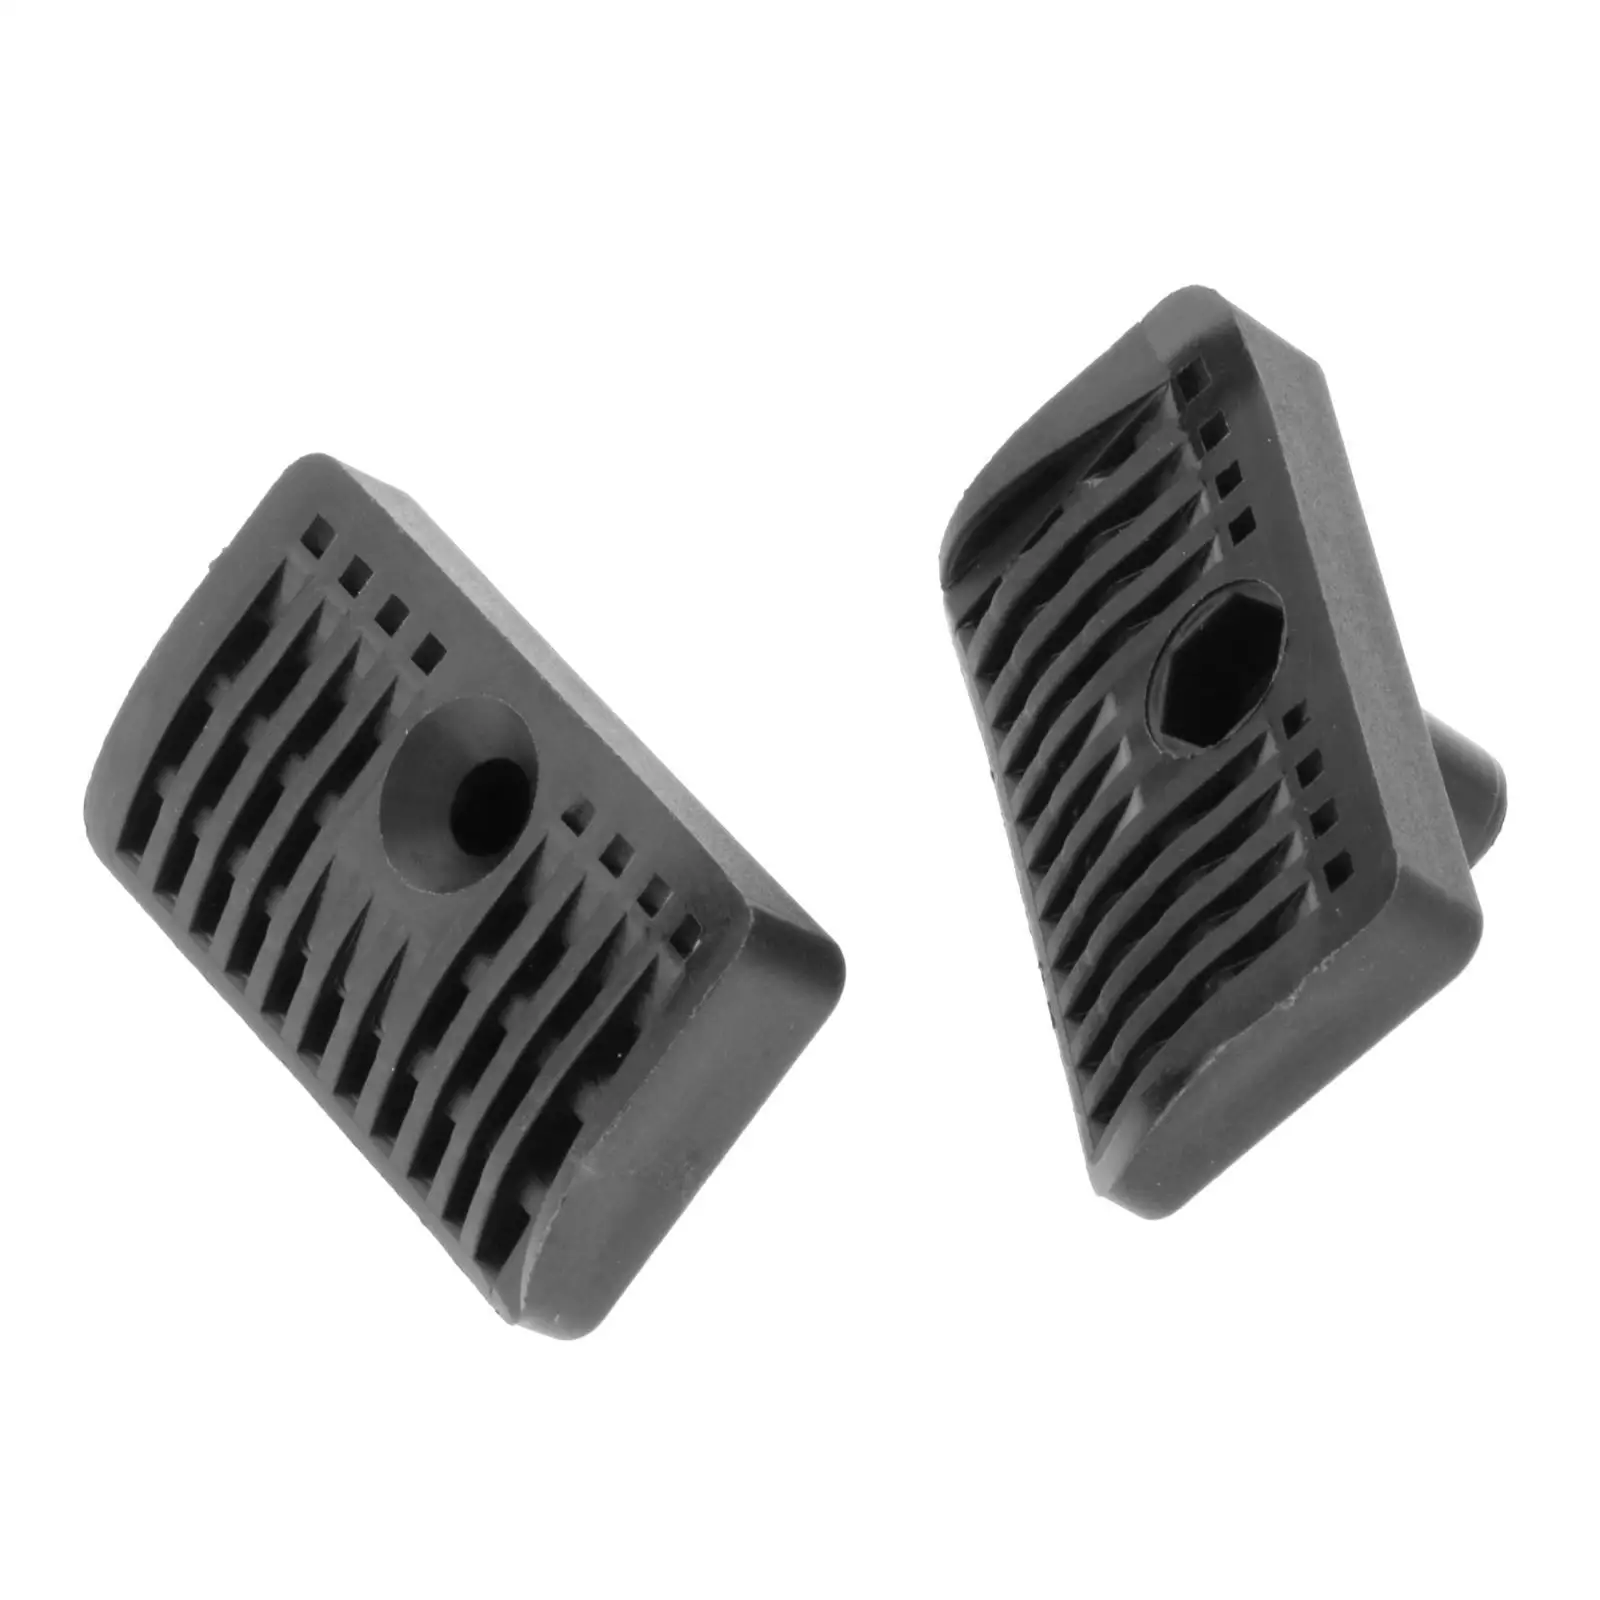 Water Inlet Covers Plastic Durable for Yamaha Accessories Parts Easy to Install Replace